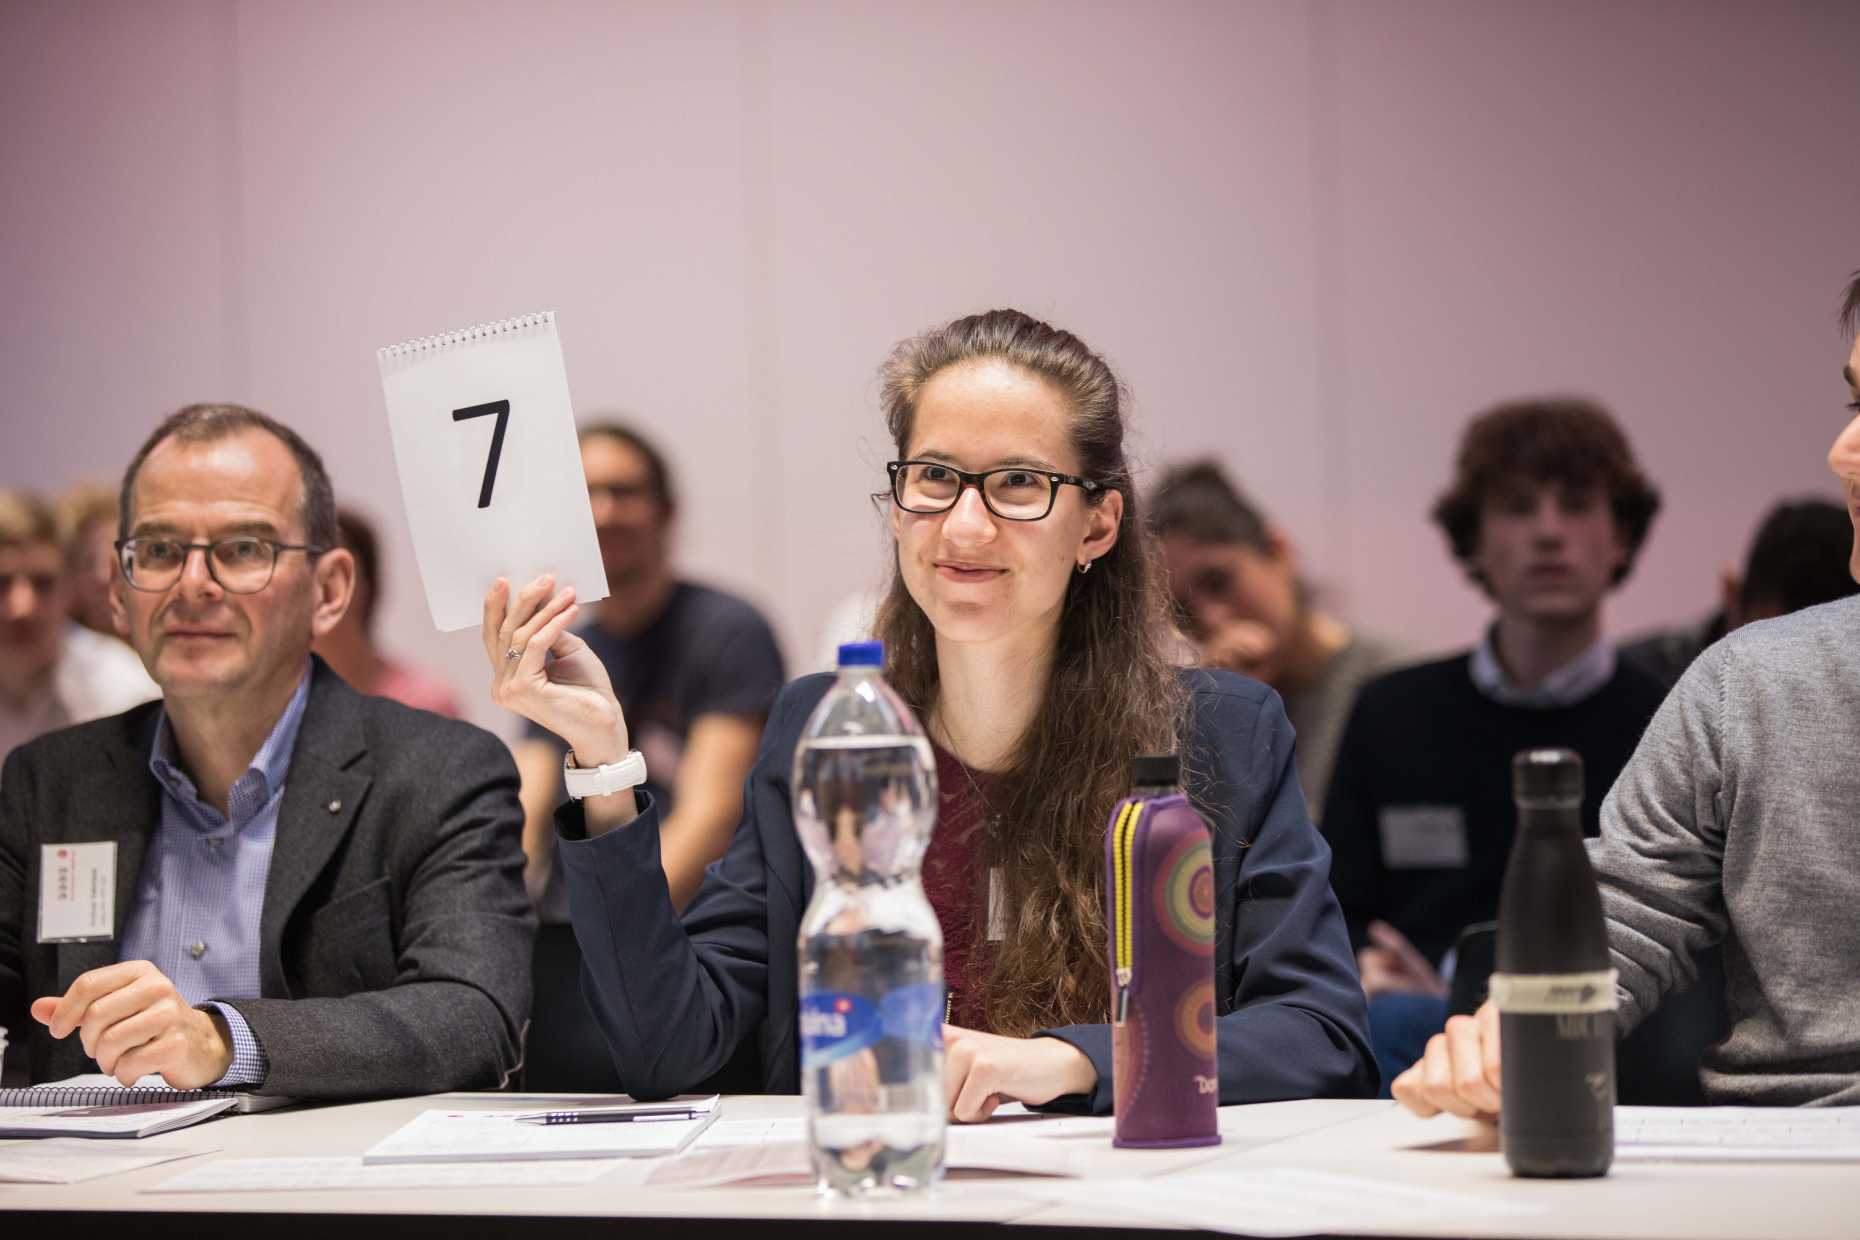 The jury not only consists of physics teachers from the involved schools but also of former participants and experts from science and industry. Jury at the tournament year 2019 (Photo: Cyrill Krähenbühl)